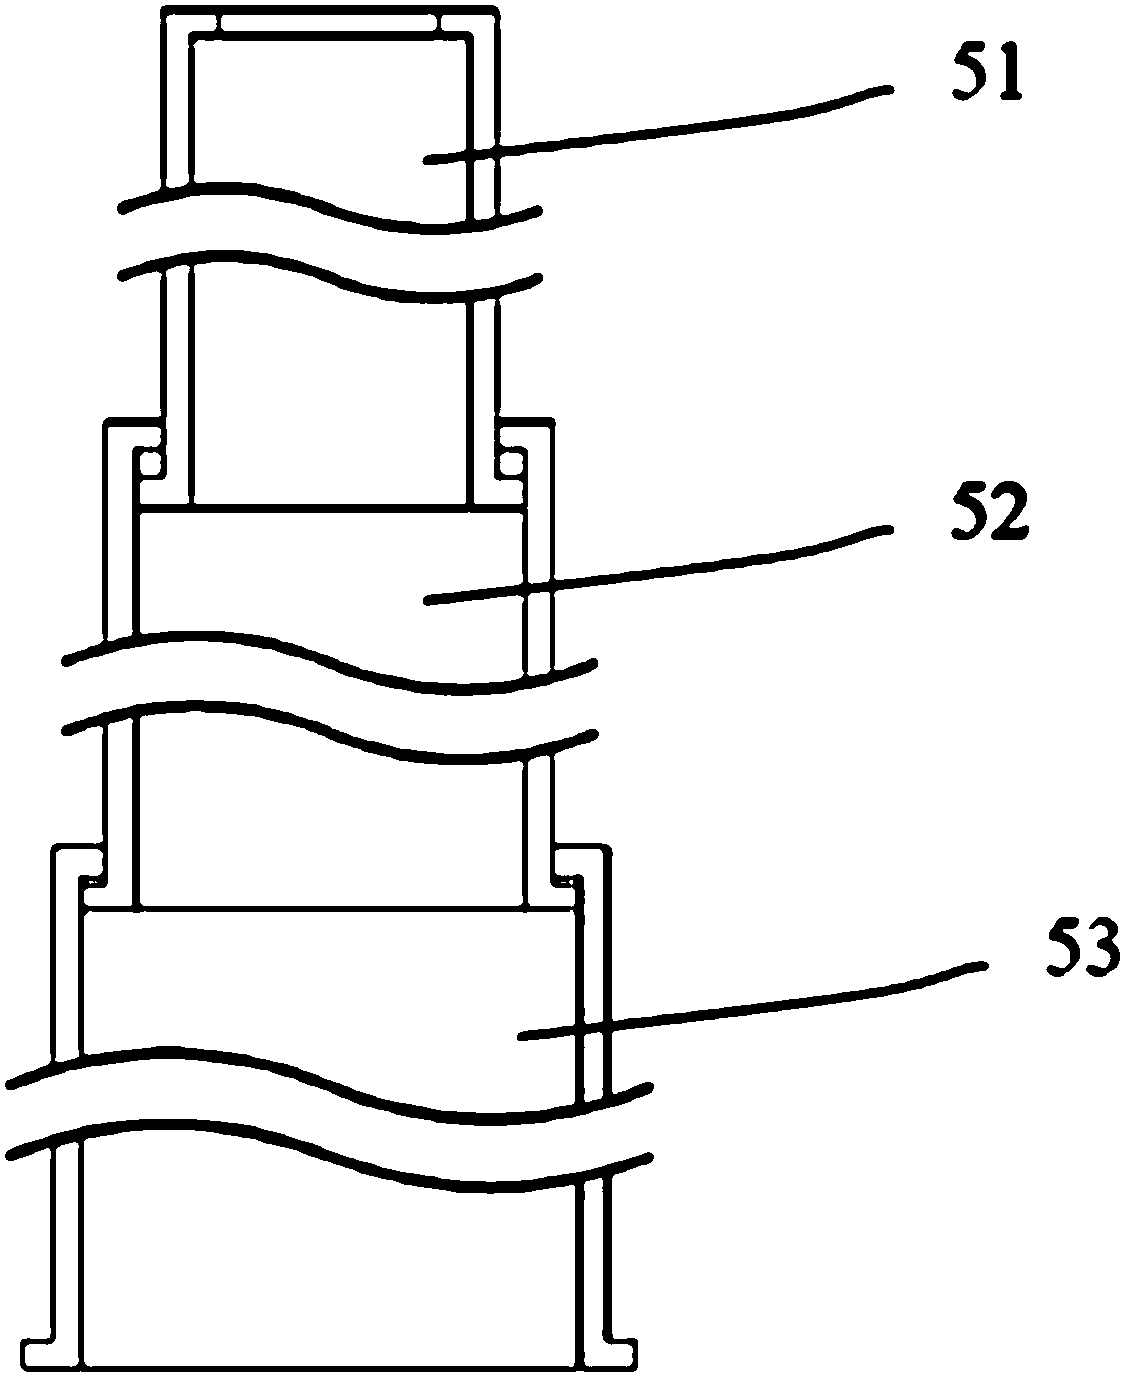 A temperature field device for vertical hvpe growth equipment